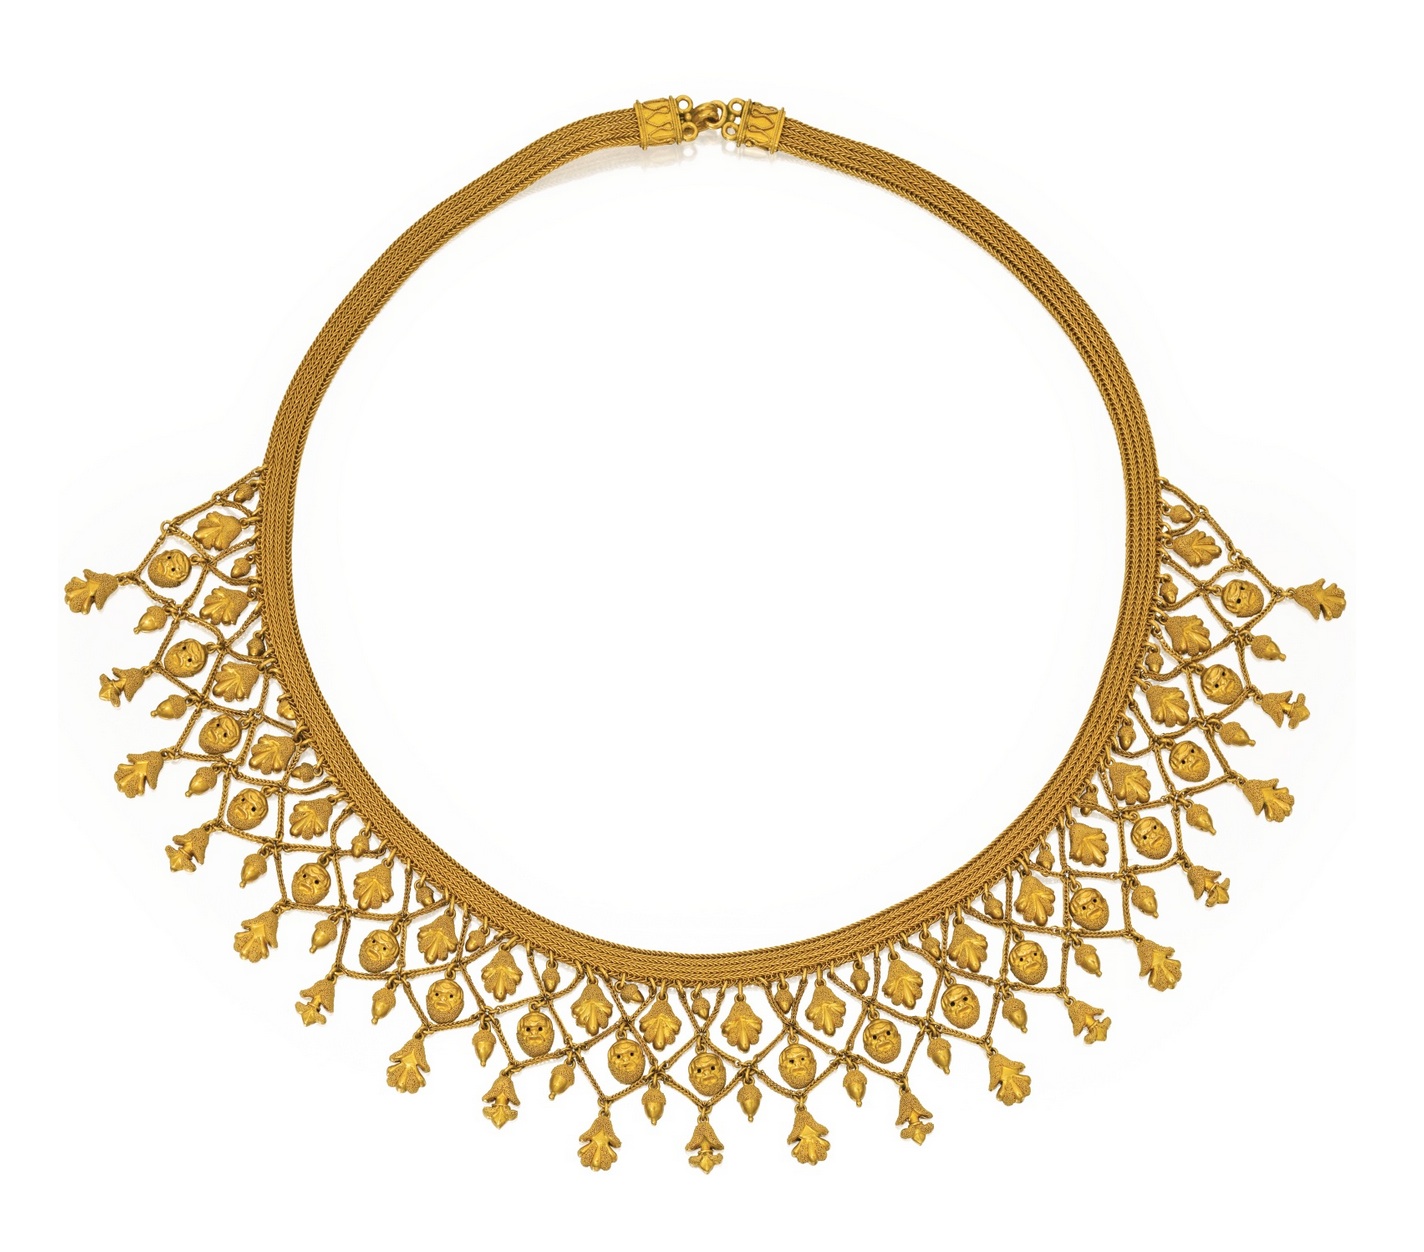 Gold necklace clipart 